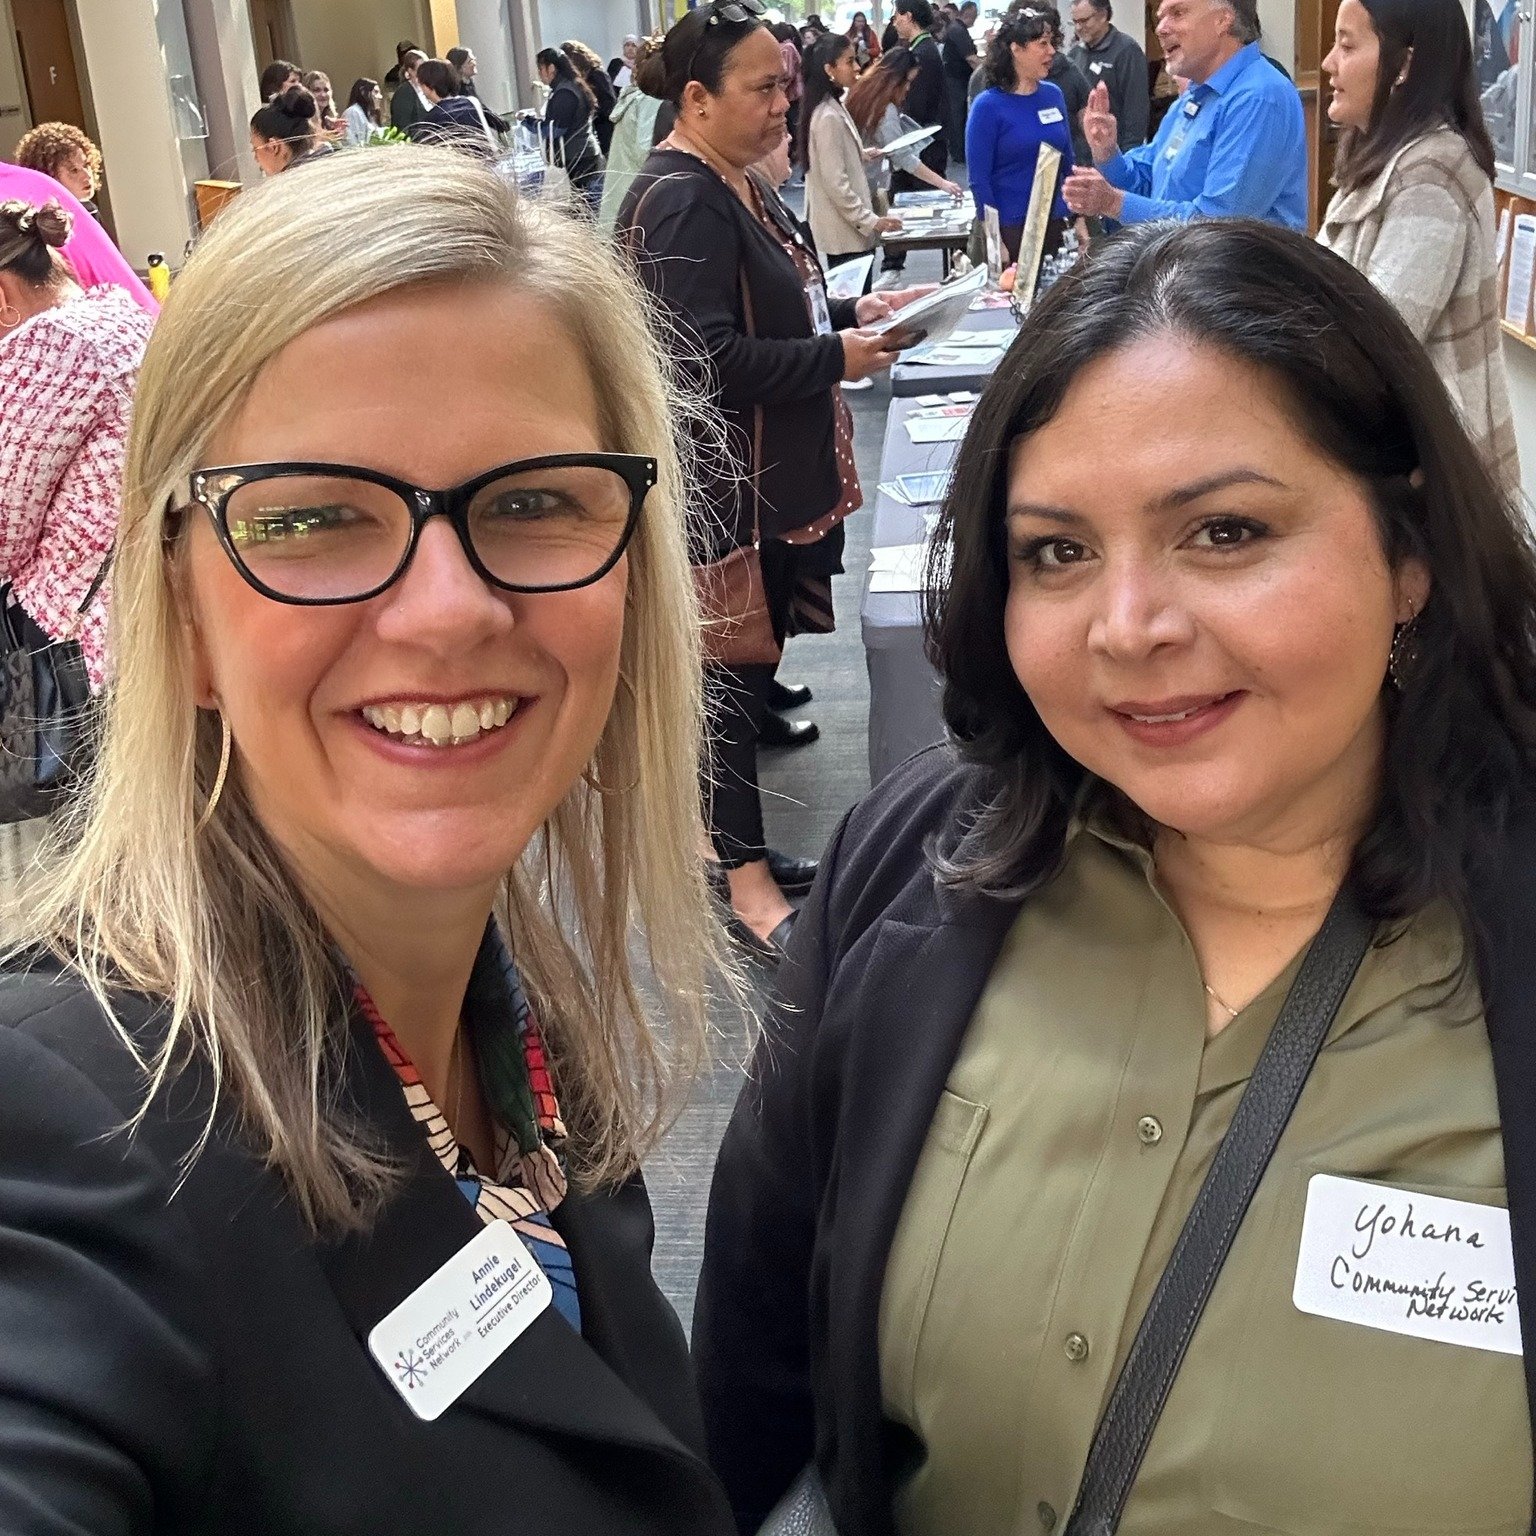 We're super excited to introduce you to Yohana Parra (@advocating_jo), who joined the CSN this week as Washington County Outreach Lead! Yohana just started with us Wednesday, and she and our Executive Director Annie were already out and about in Hill